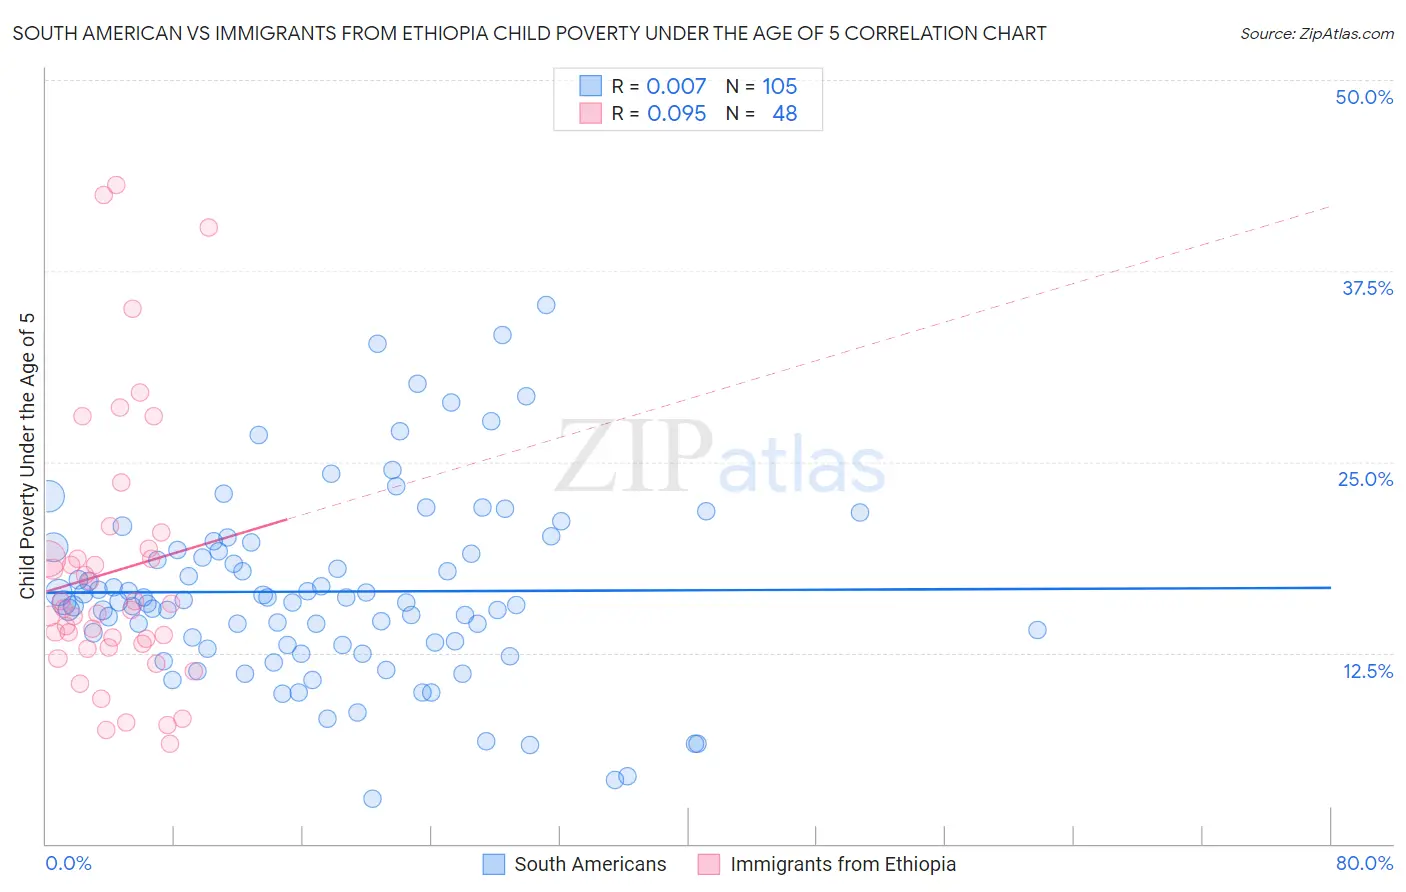 South American vs Immigrants from Ethiopia Child Poverty Under the Age of 5